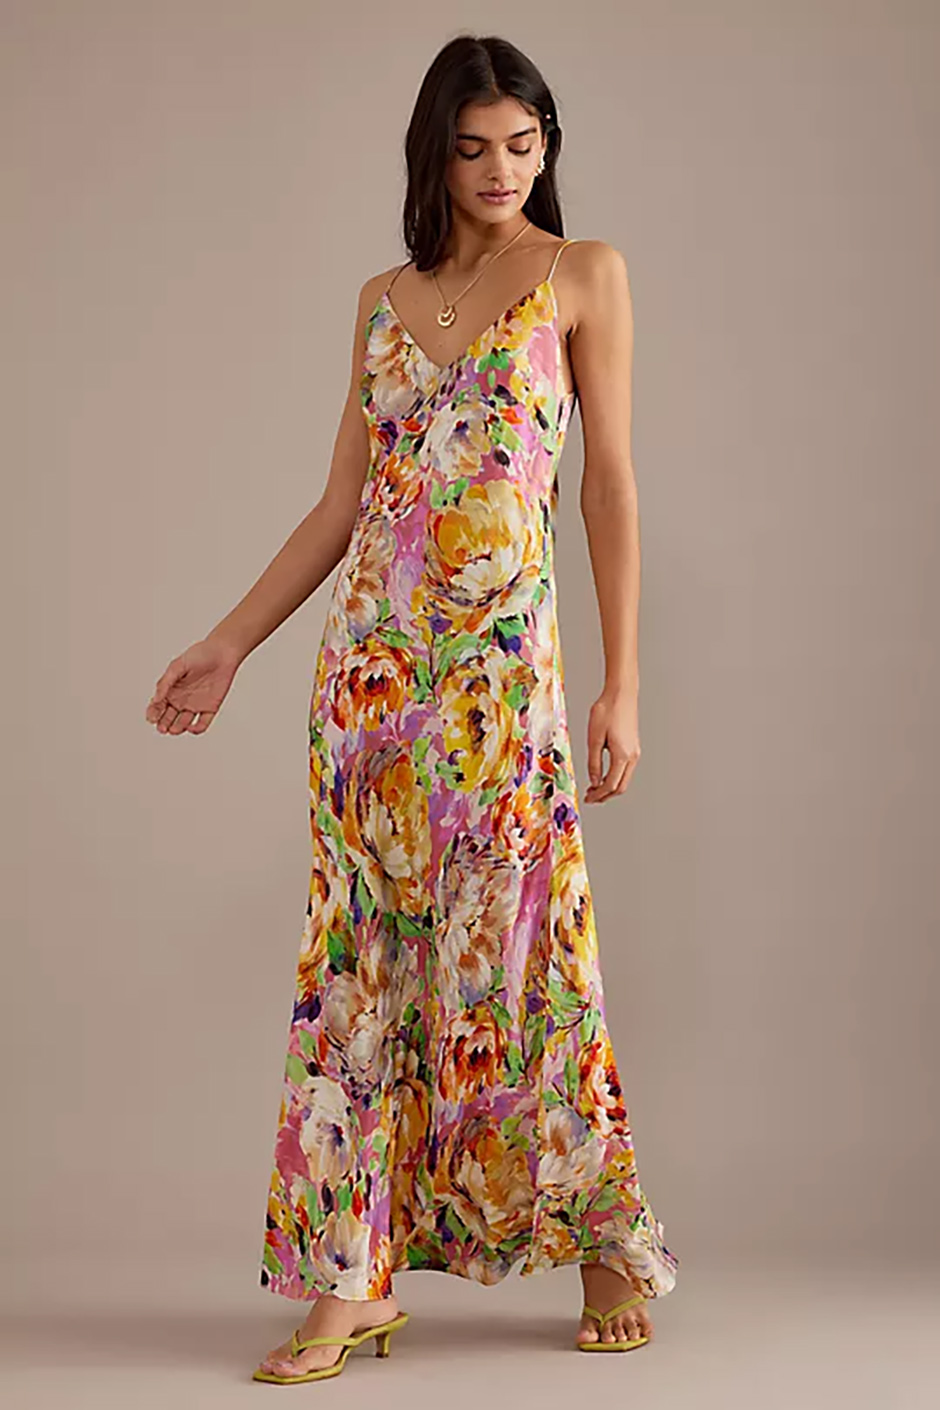 Floral maxi slip dress from Anthropologie for a Summer wedding guest dress idea